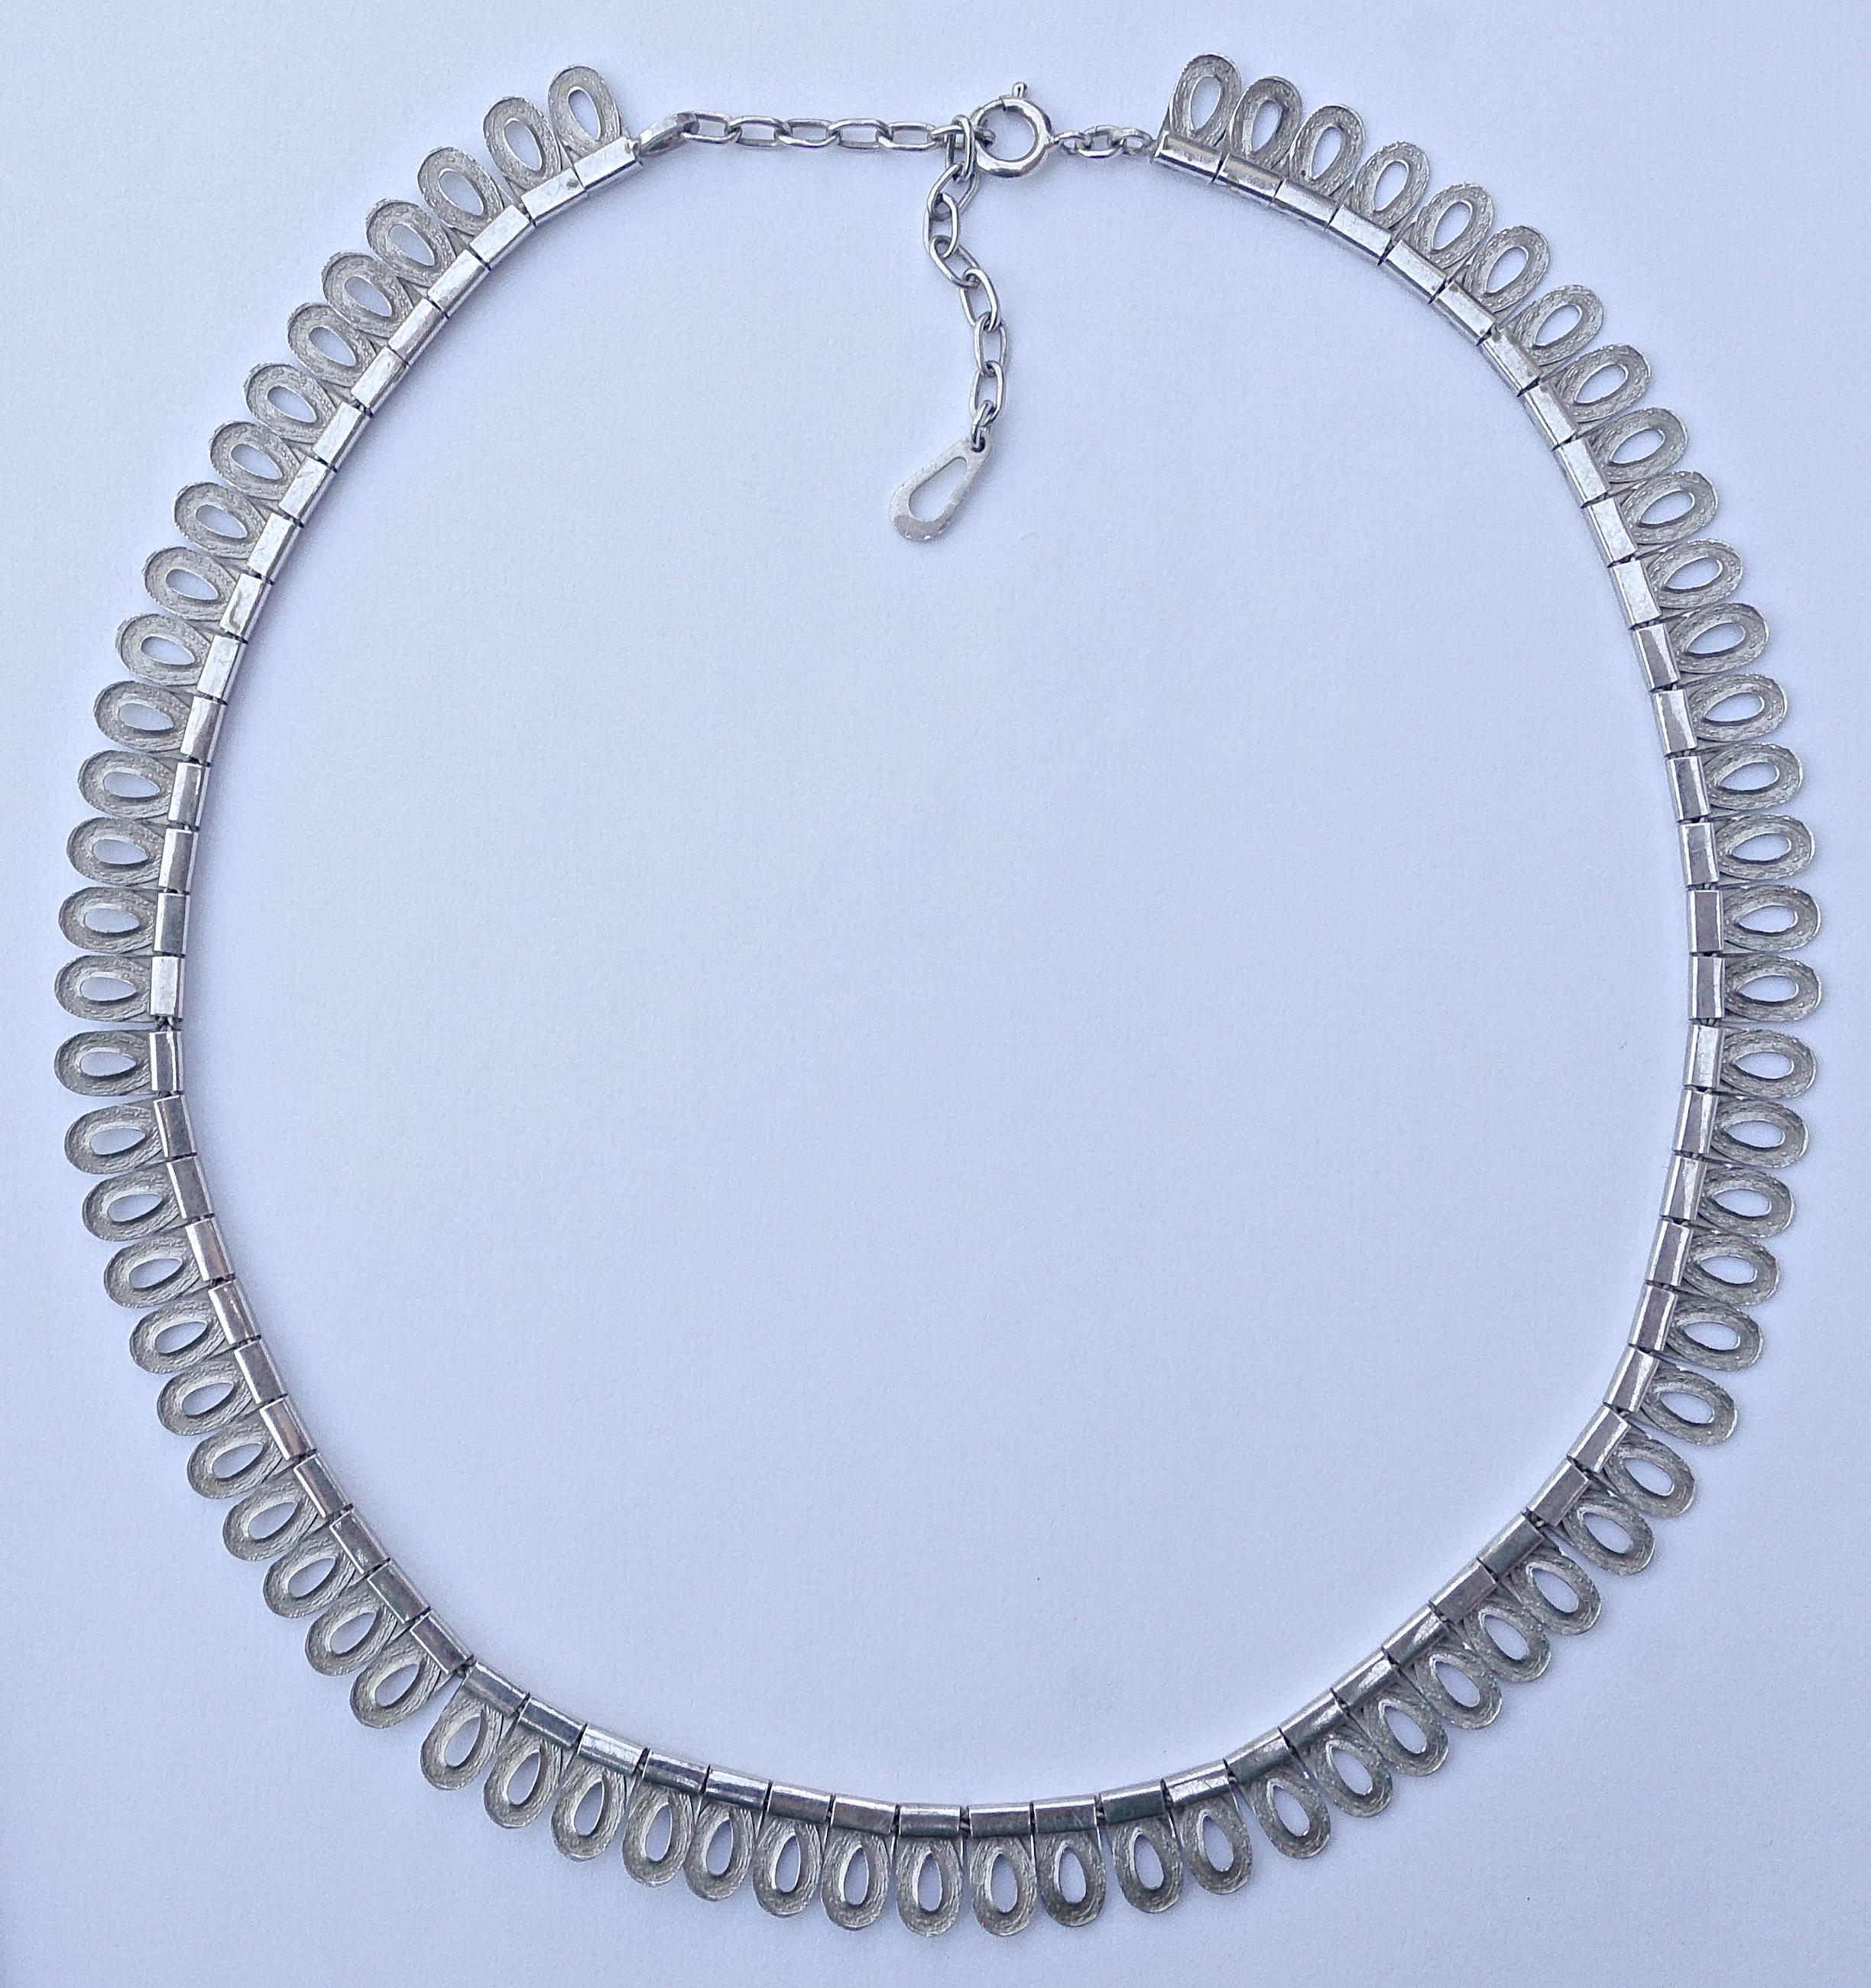 Stylish vintage sterling silver necklace featuring shiny links with a lovely textured oval design. Length 42.7cm, 16.81 inches, plus an extension chain of 4.8cm, 1.89 inches, and width 1.15cm, .45 inch. The necklace is stamped on the end link E Ld